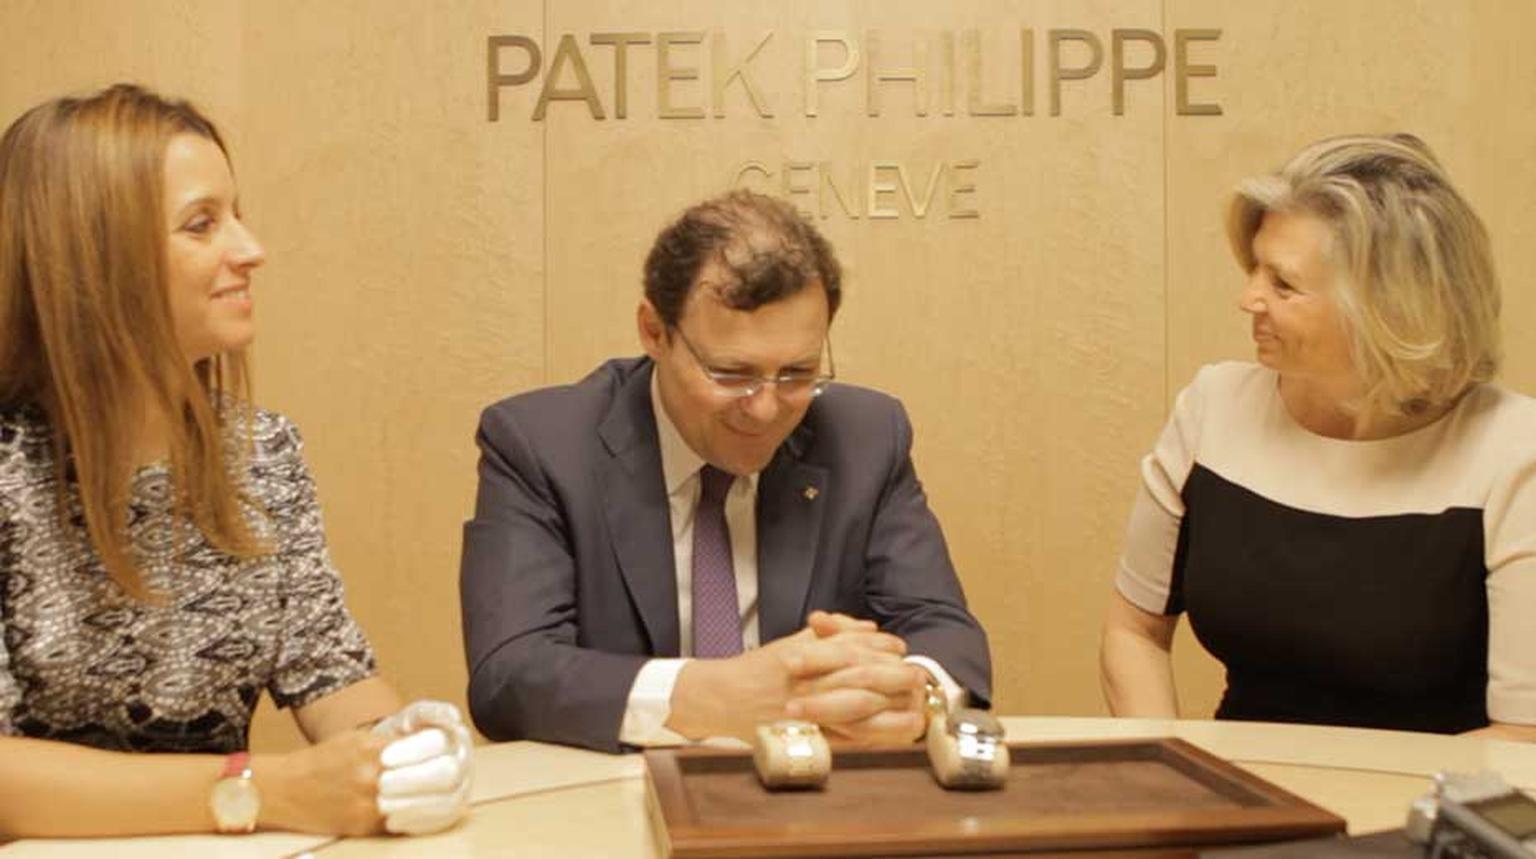 Maria Doulton sat down with Thierry Stern, President of Patek Philippe, and his wife, Sandrine Stern, who is in charge of design, at Baselworld to discuss the brand's newest watches for men and women: the Nautilus and the Calatrava Moon phase